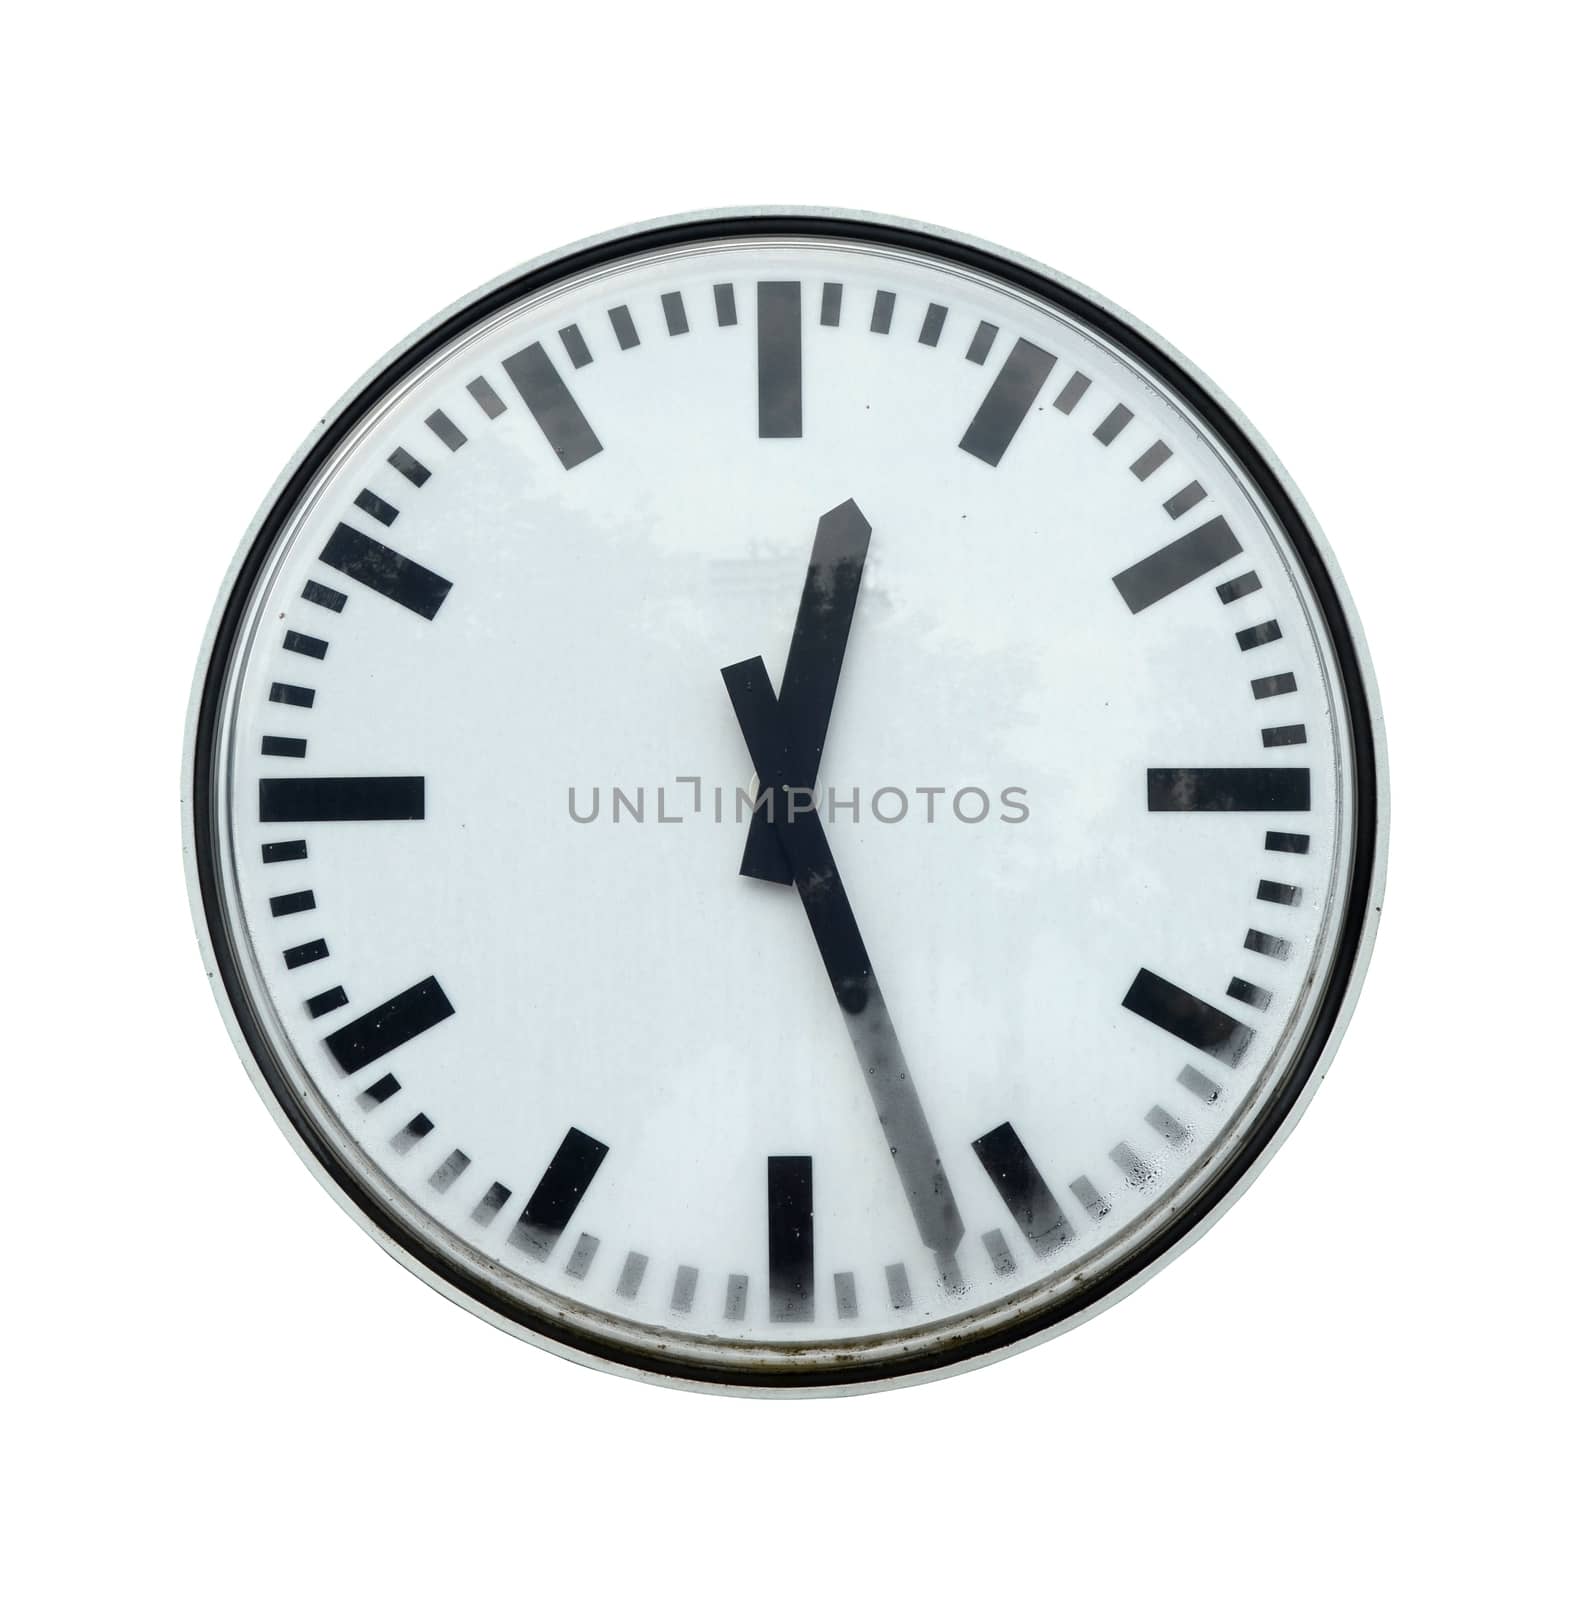 Isolation Of Grungy Station Clock With Clipping Path